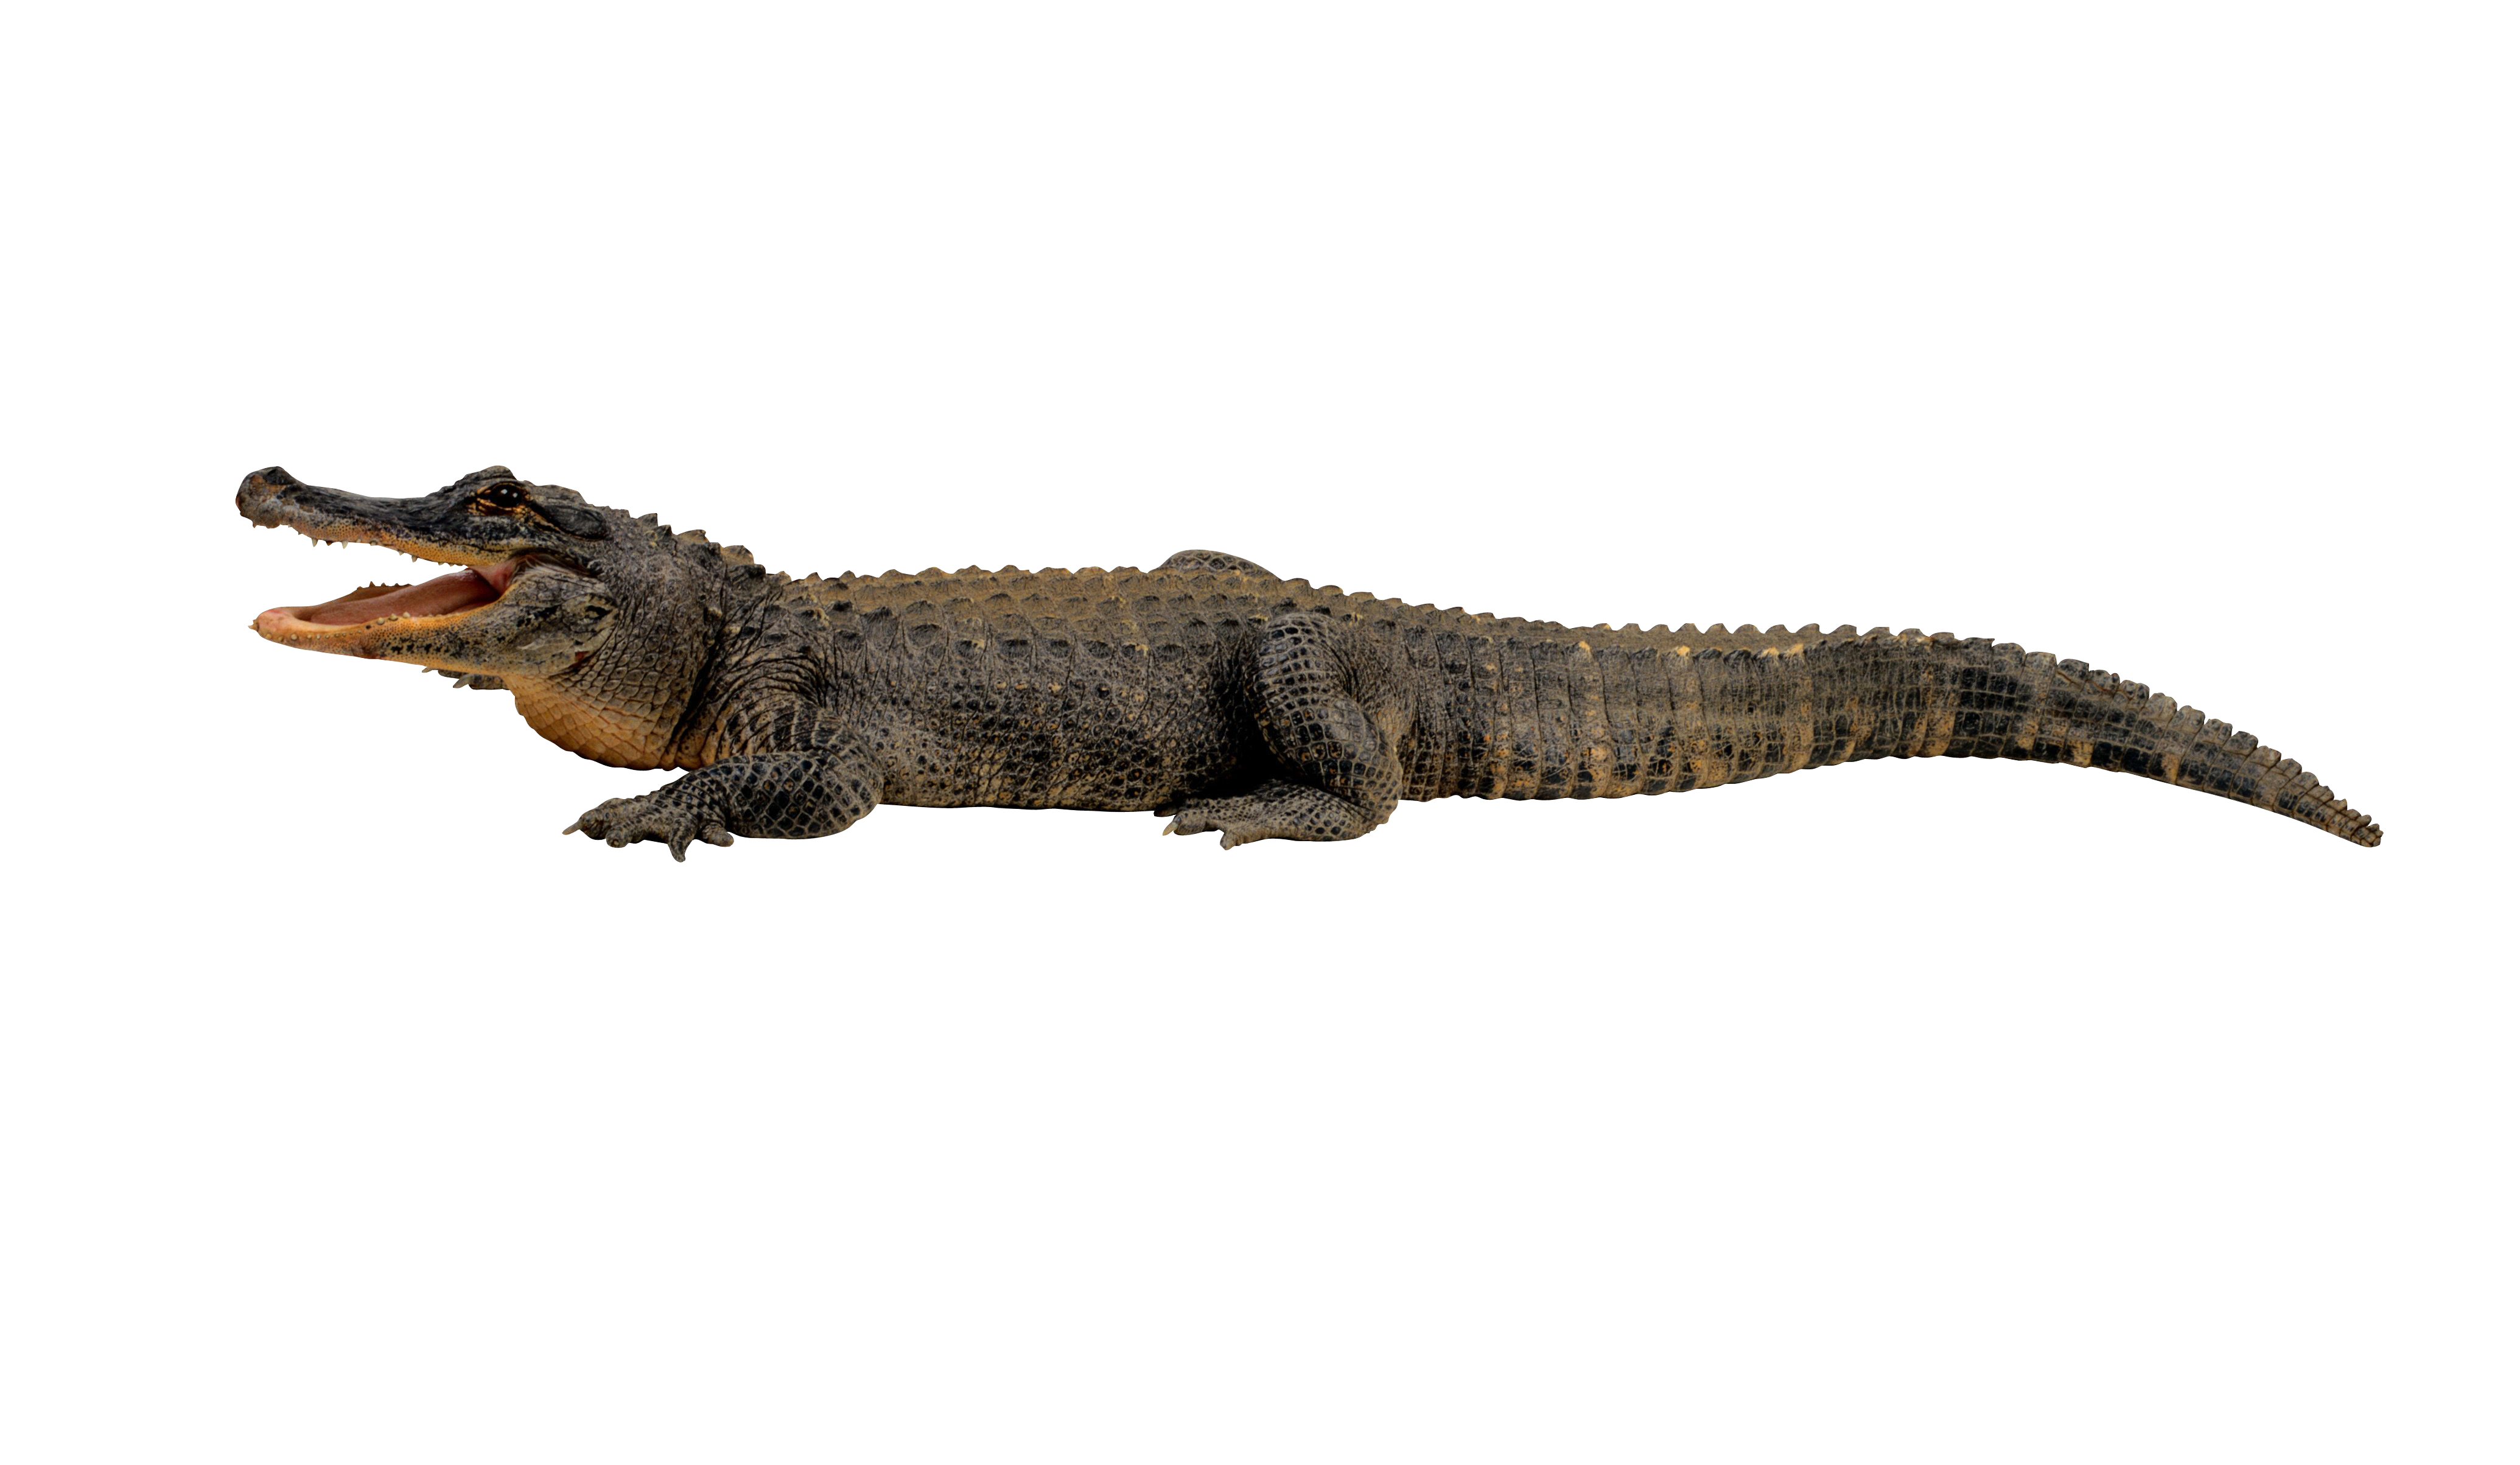 Crocodile from side lying on ground